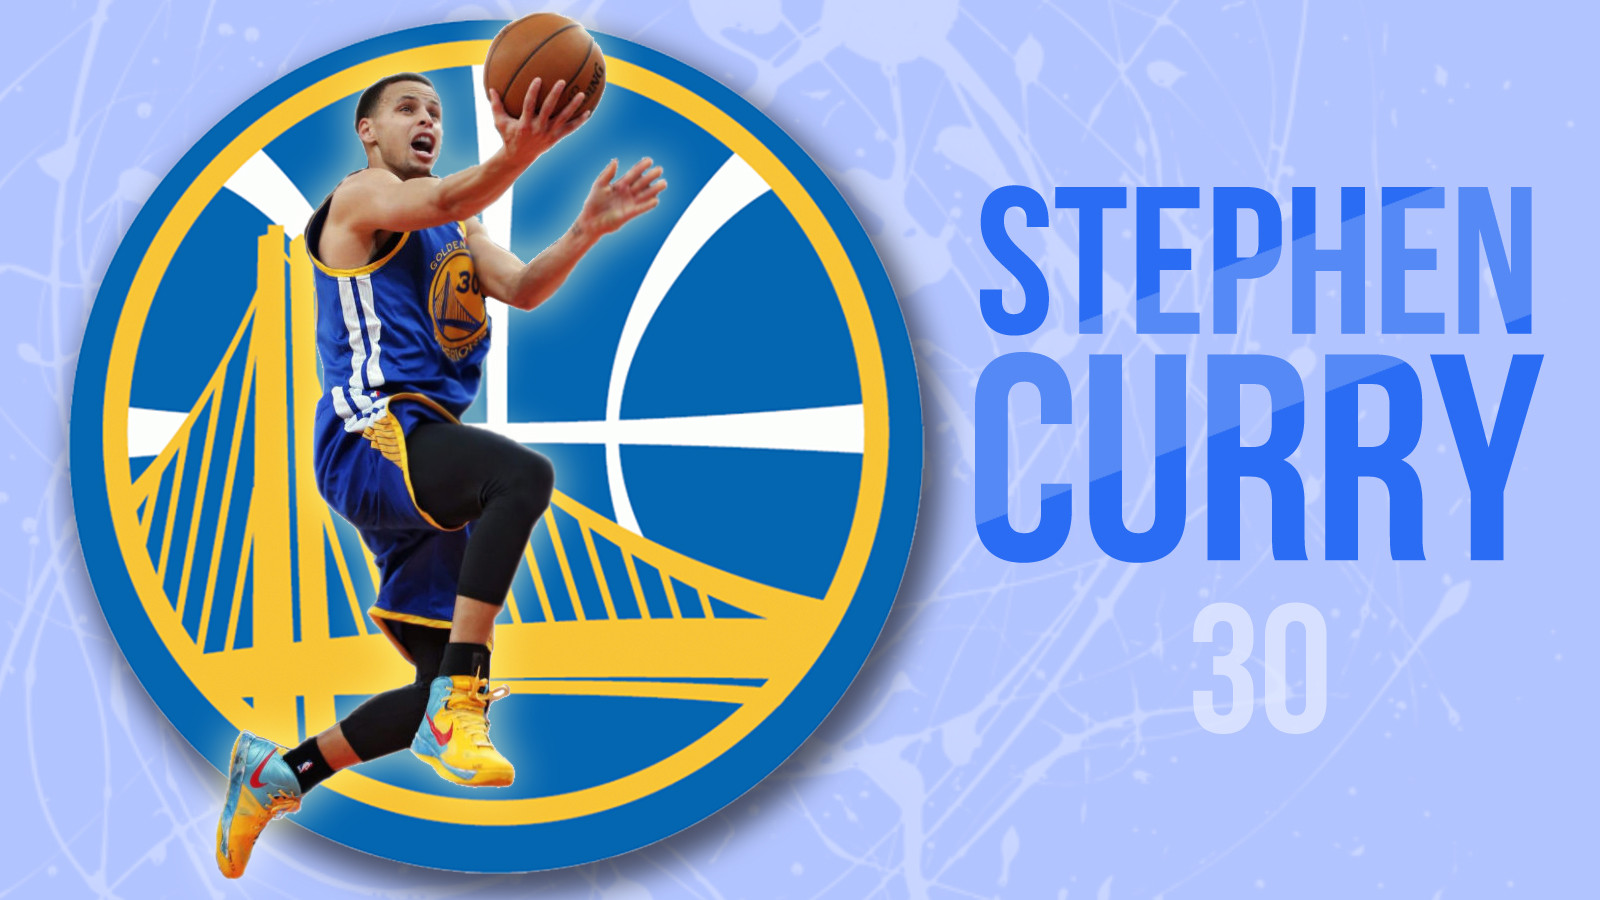 Stephen Curry Wallpapers-1 - Stephen Curry Photos Download - HD Wallpaper 